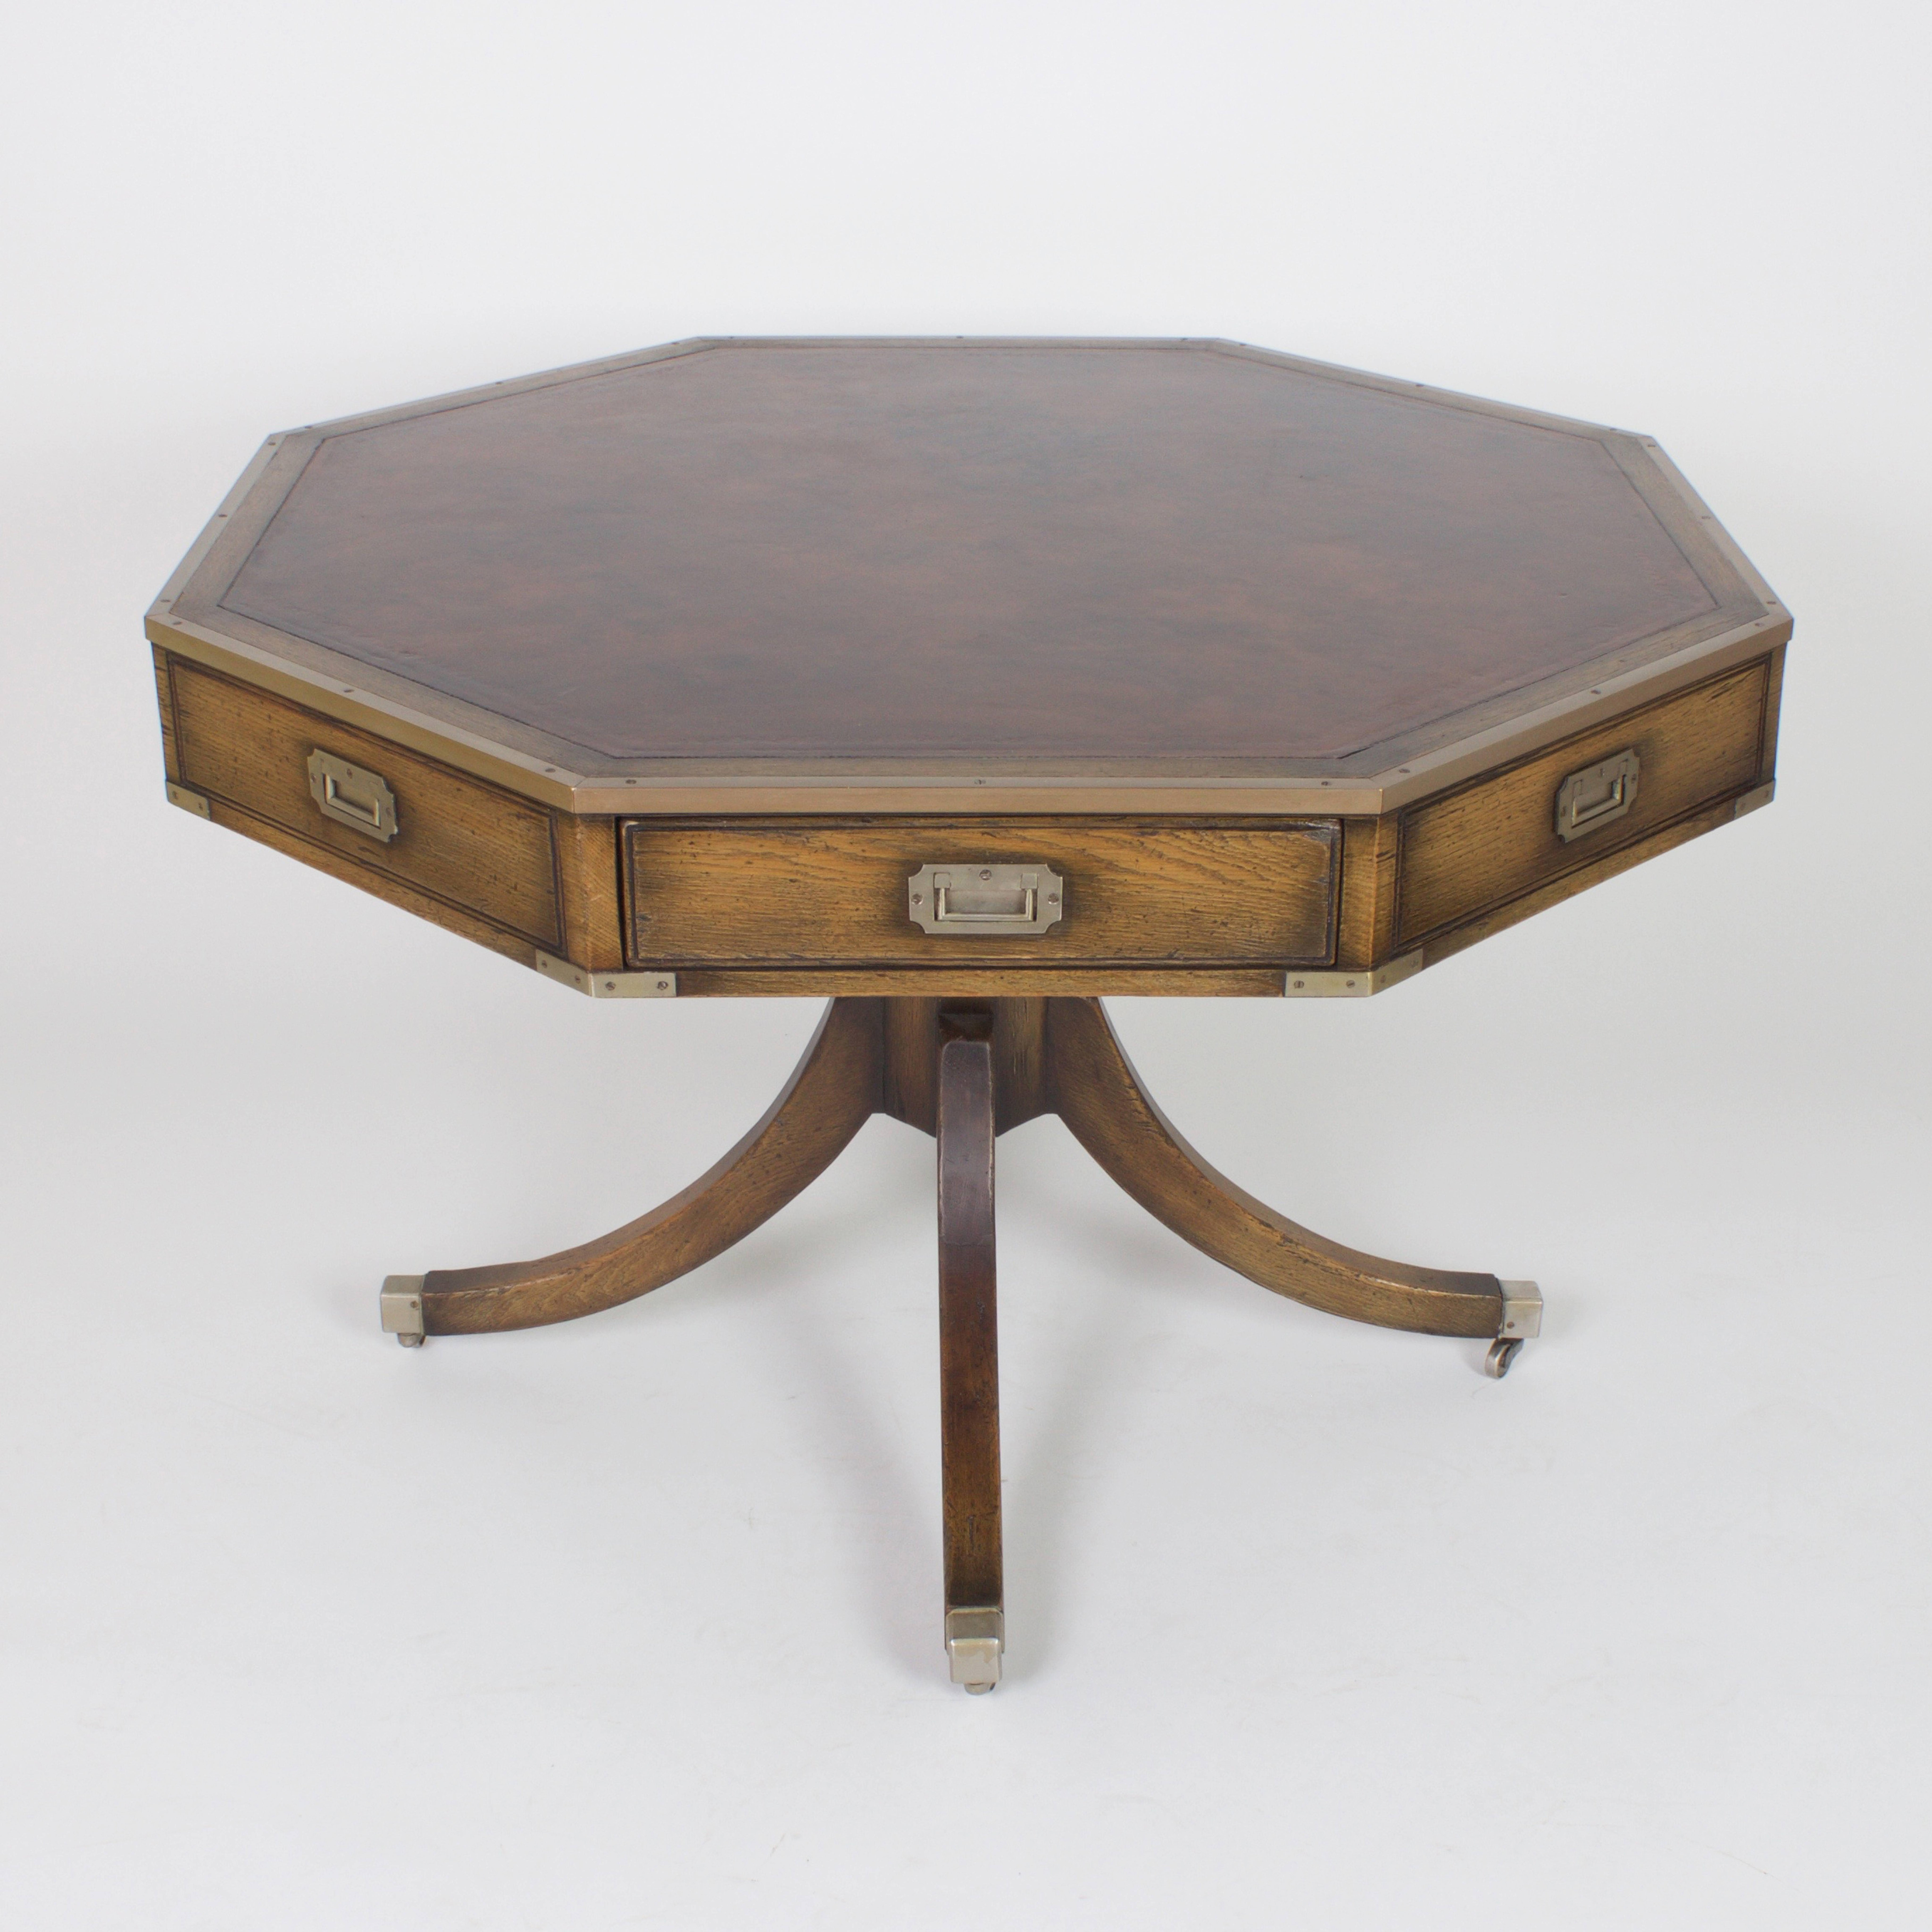 Handsome, Campaign style drum or games table with a tooled brown leather octagonal top, brass hardware and four drawers. Crafted with warm grained chestnut and ready for action. The base has four splayed legs connected to a center post with brass